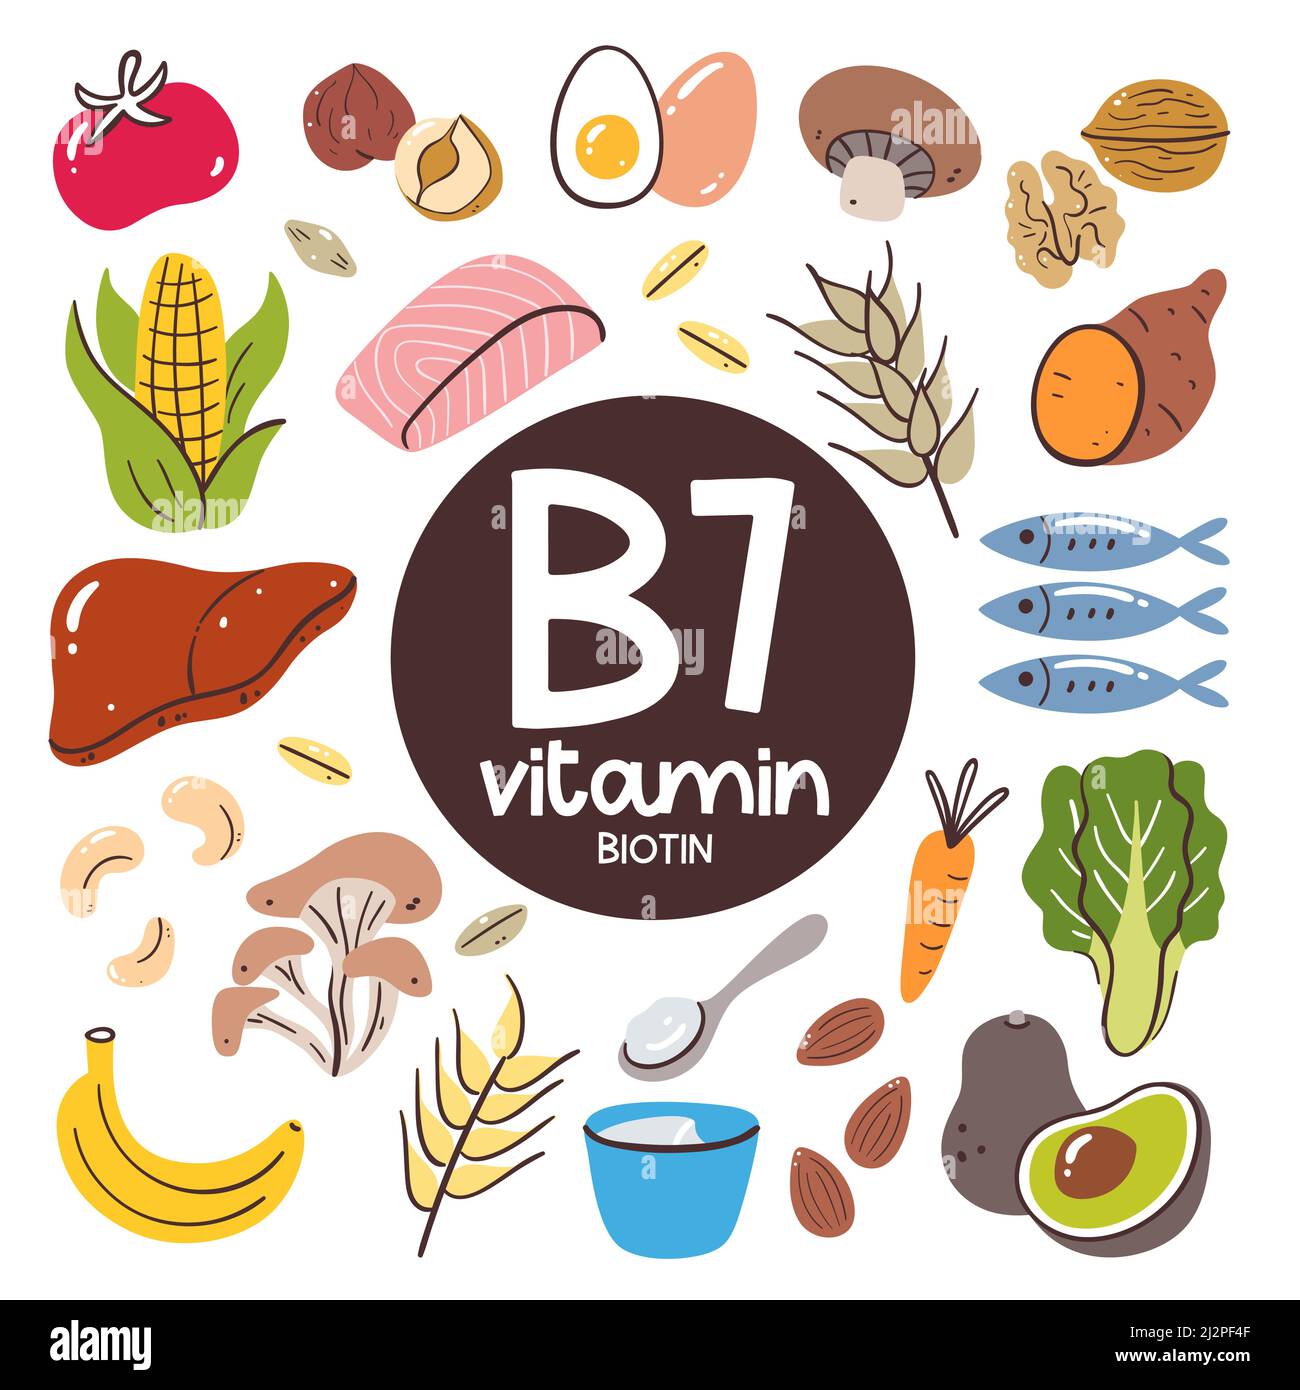 Food products with high level of Vitamin B7 (Biotin). Cooking ingredients. Fruits, vegetables, mushrooms, nuts, dairy products, fish, liver. Stock Vector